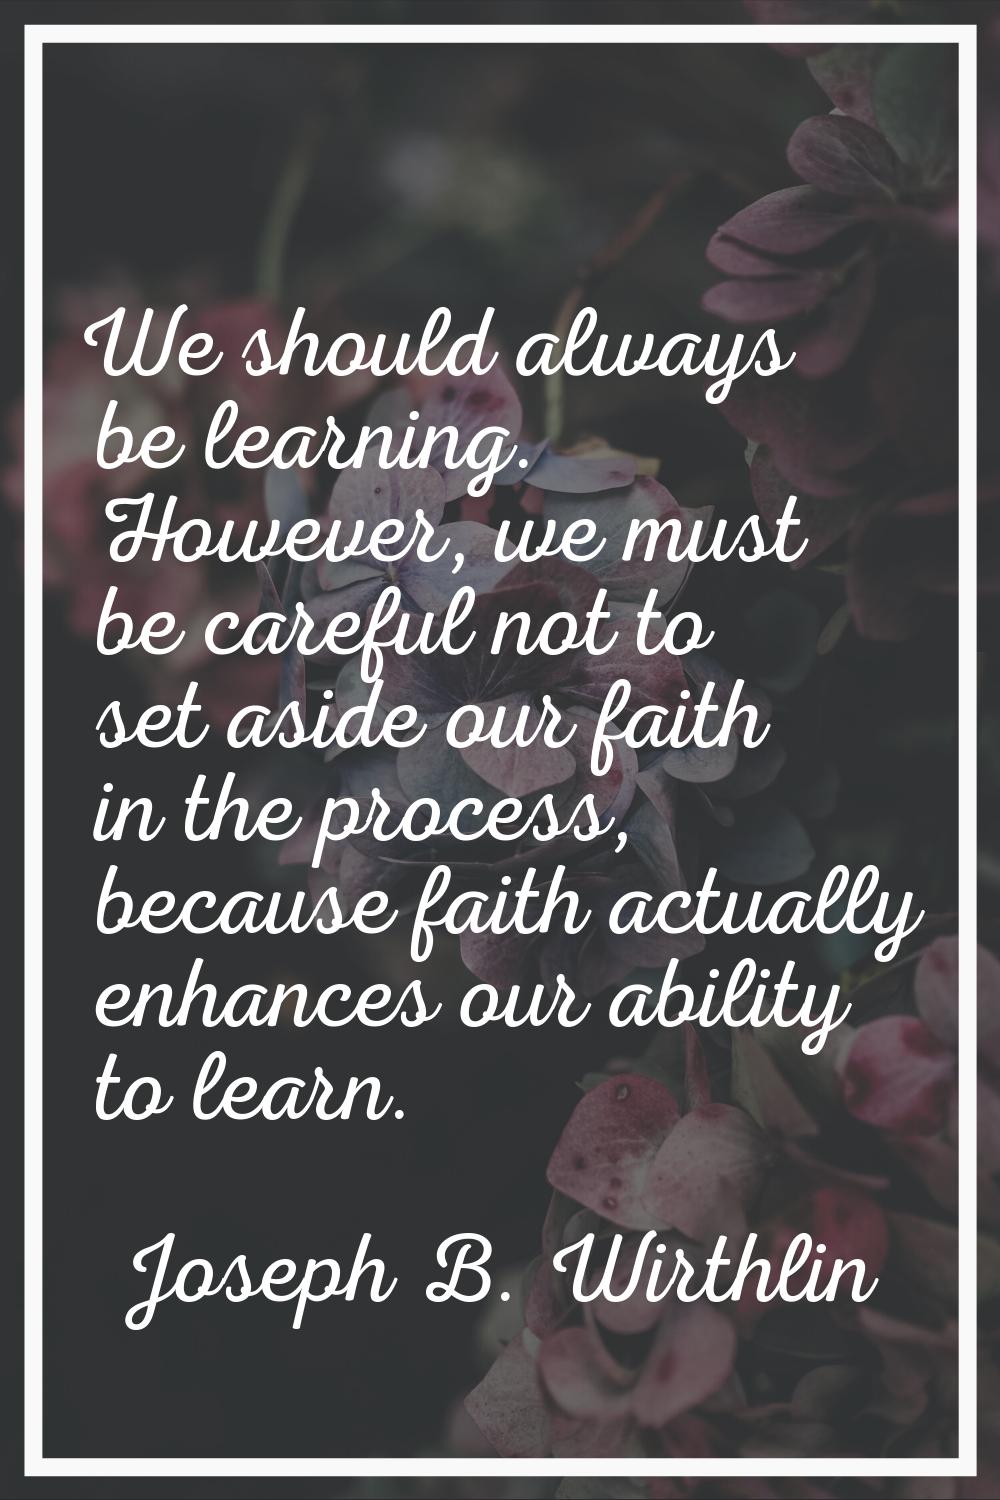 We should always be learning. However, we must be careful not to set aside our faith in the process